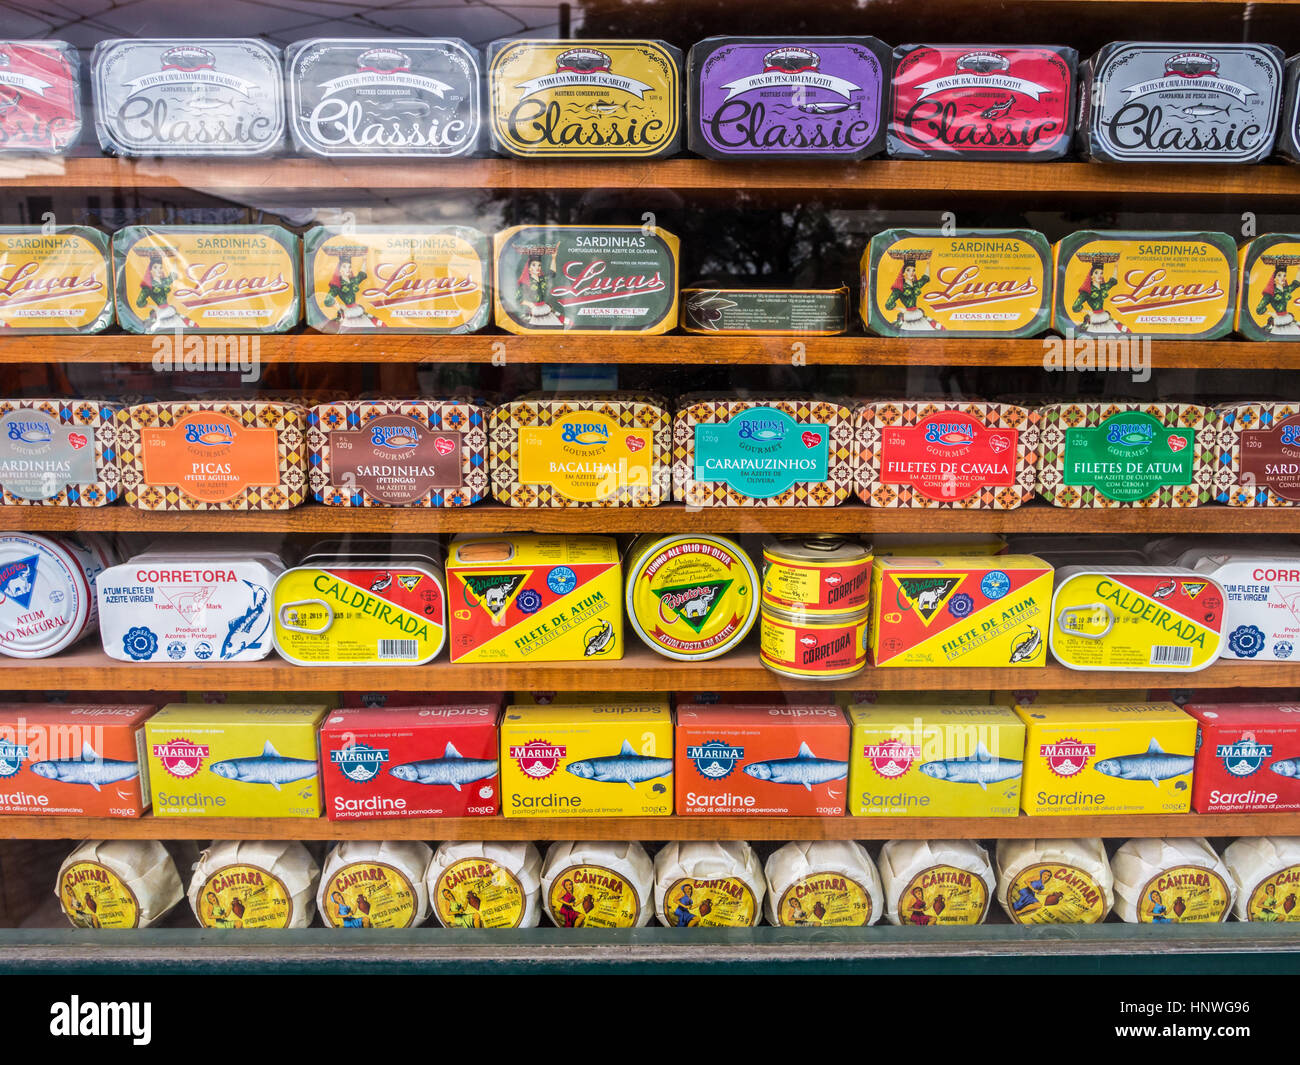 LISBON, PORTUGAL - JANUARY 10, 2017: Different types of sardines and other typical Portuguese products sold in the old town of Lisbon. Stock Photo